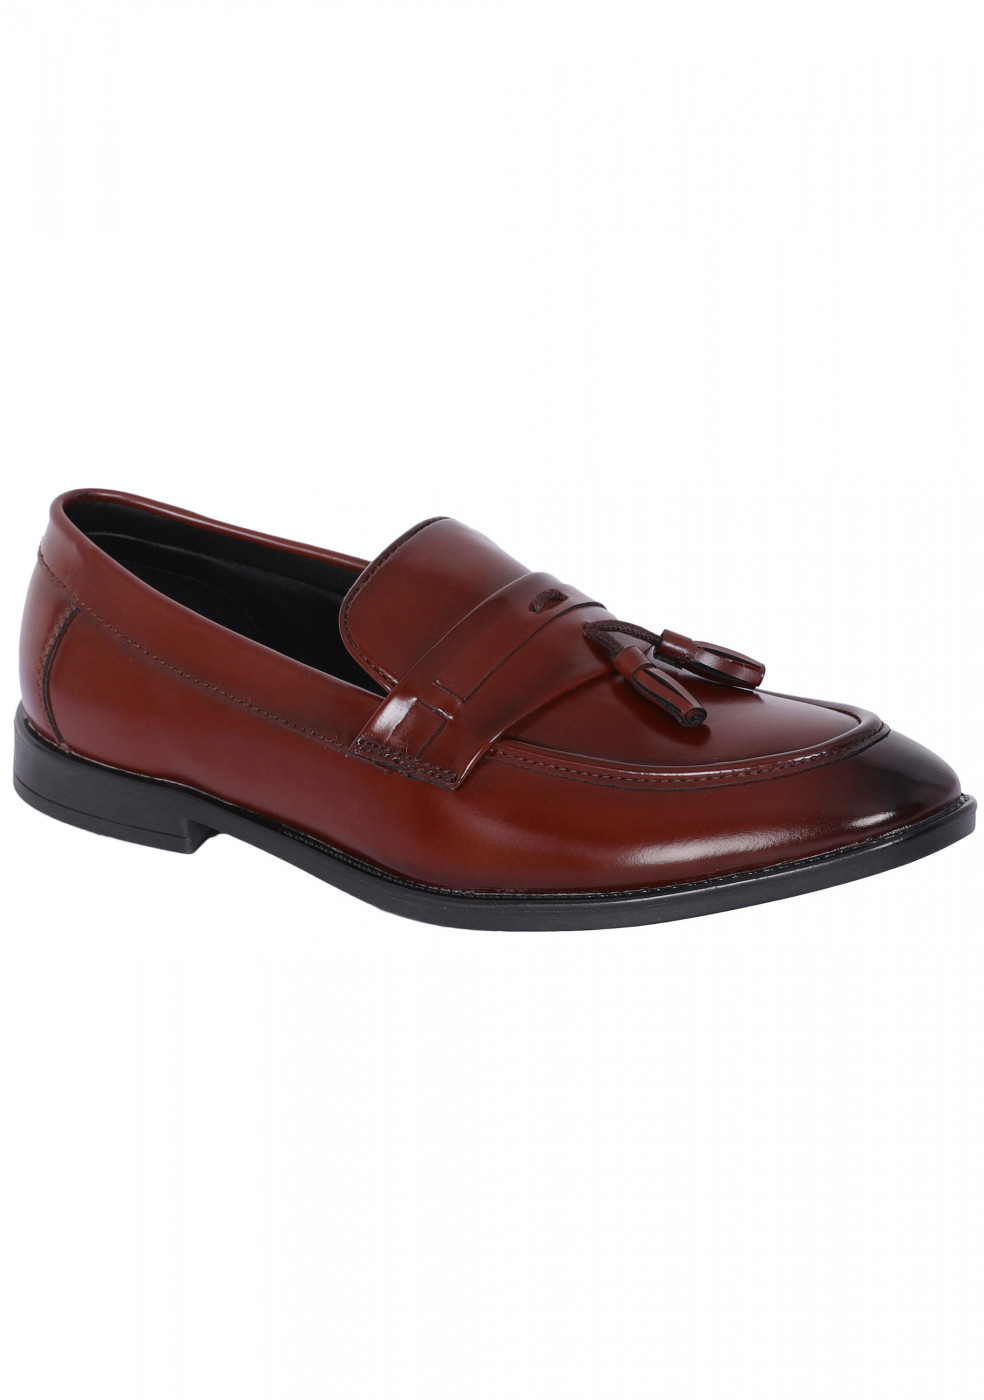 XSTOM Stylish Brown Shoes For Men